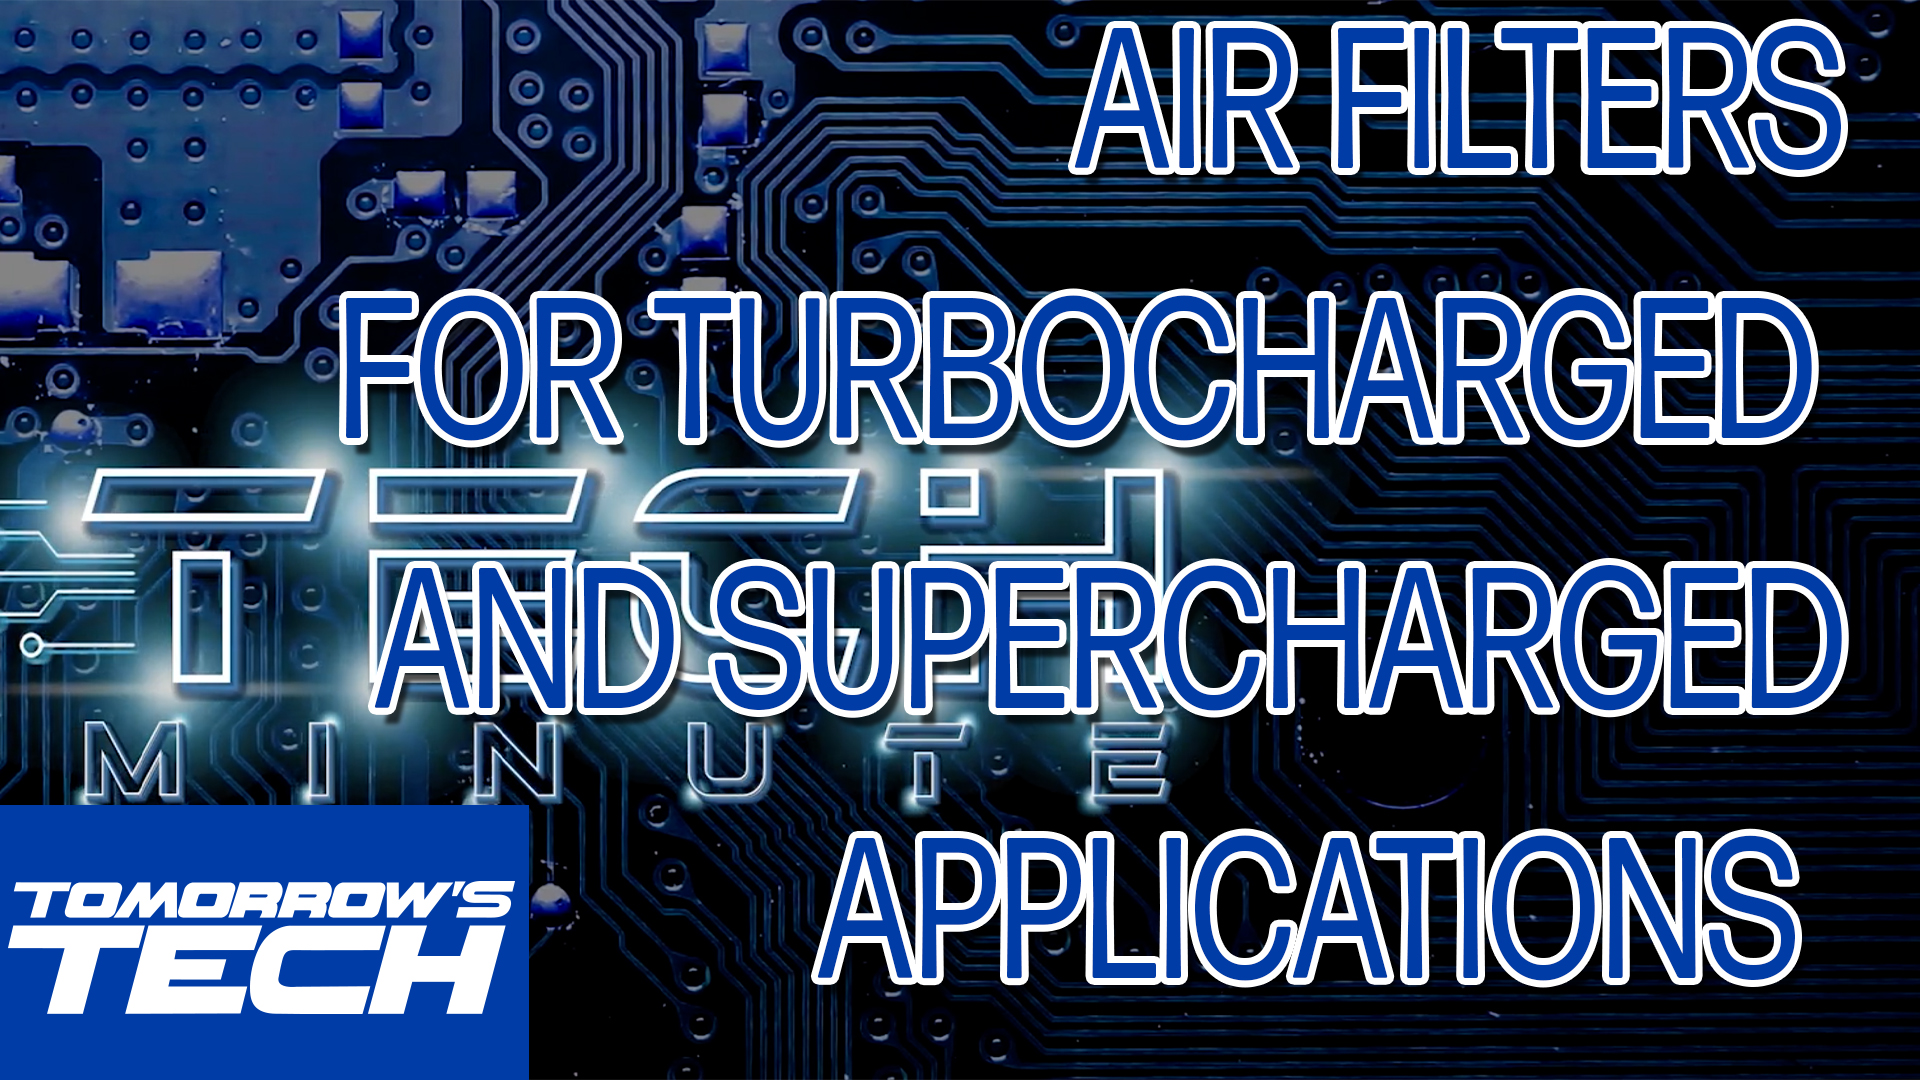 Air Filters For Turbocharged And Supercharged Applications